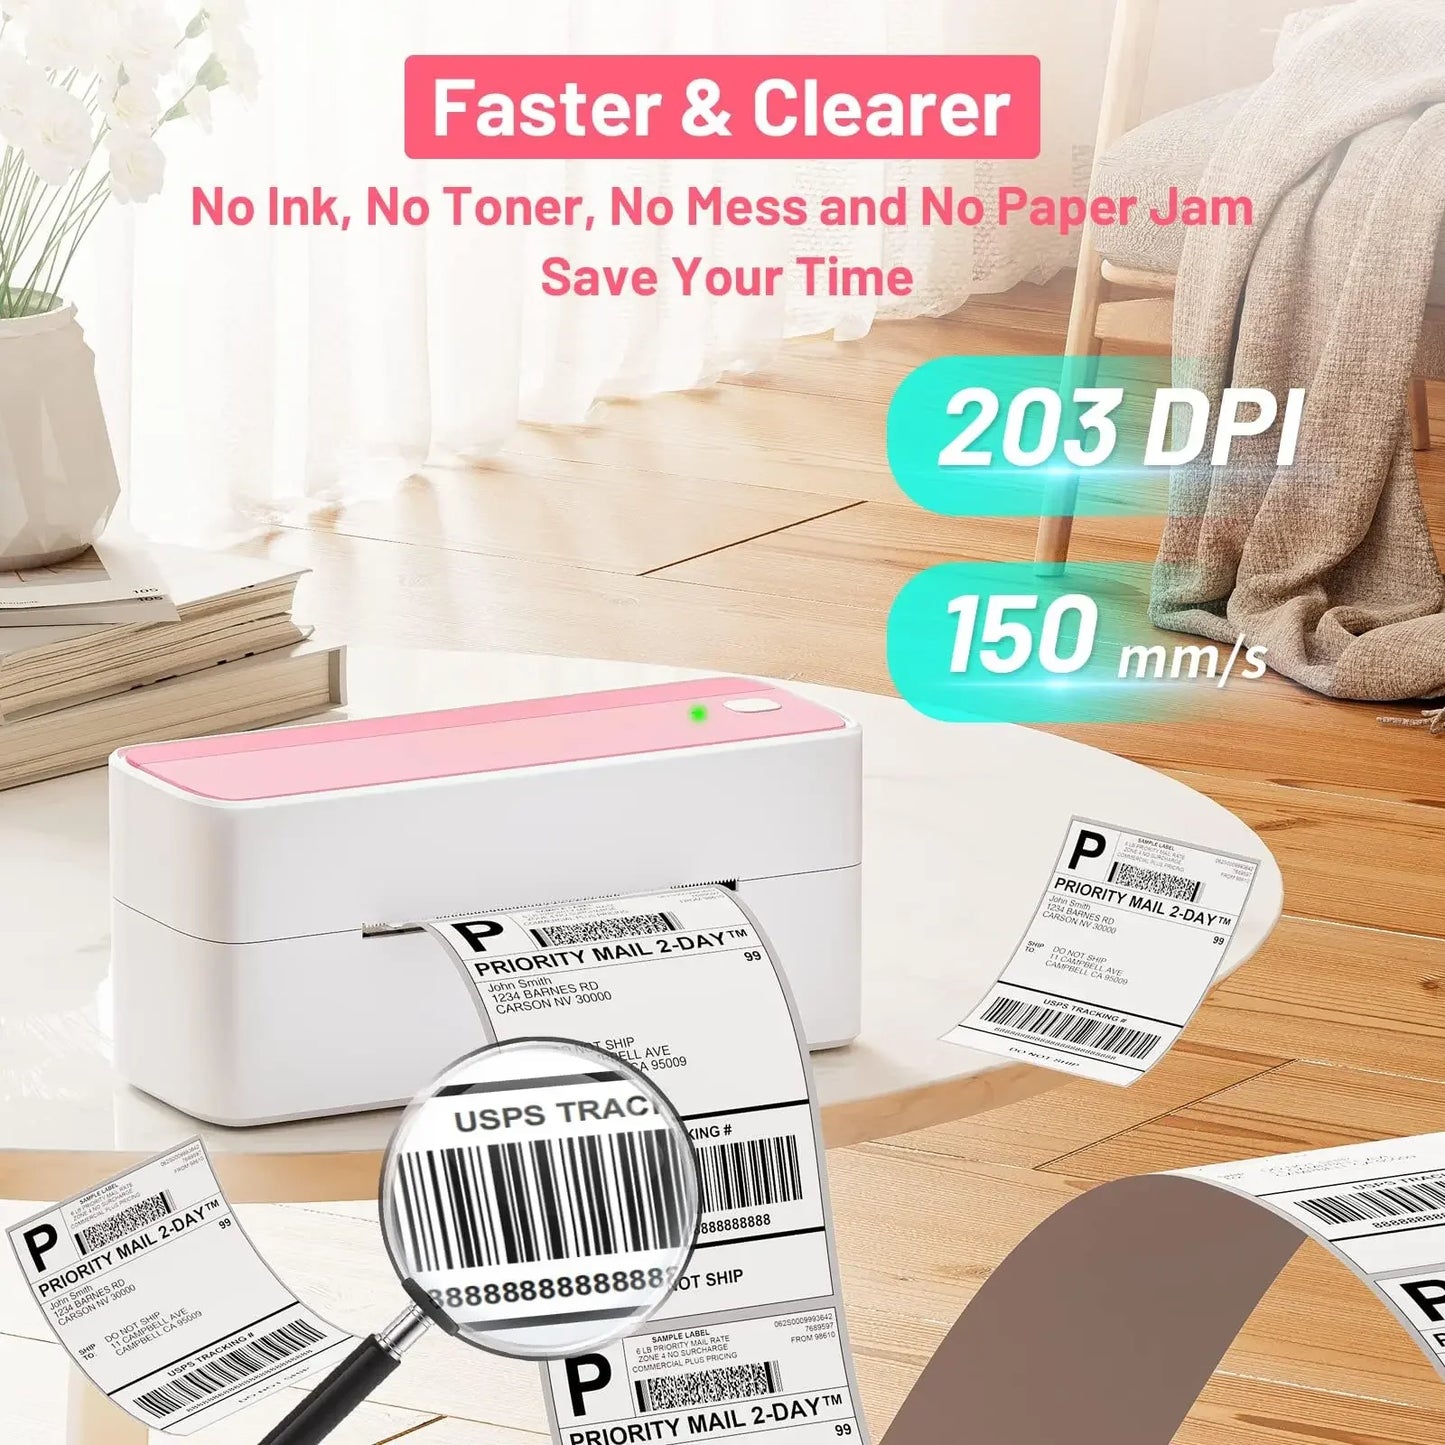 Phomemo 241 Bluetooth Thermal Label Printer Wireless Shipping Label Printer Compatible with iPhone Android Mac Window Wide Used